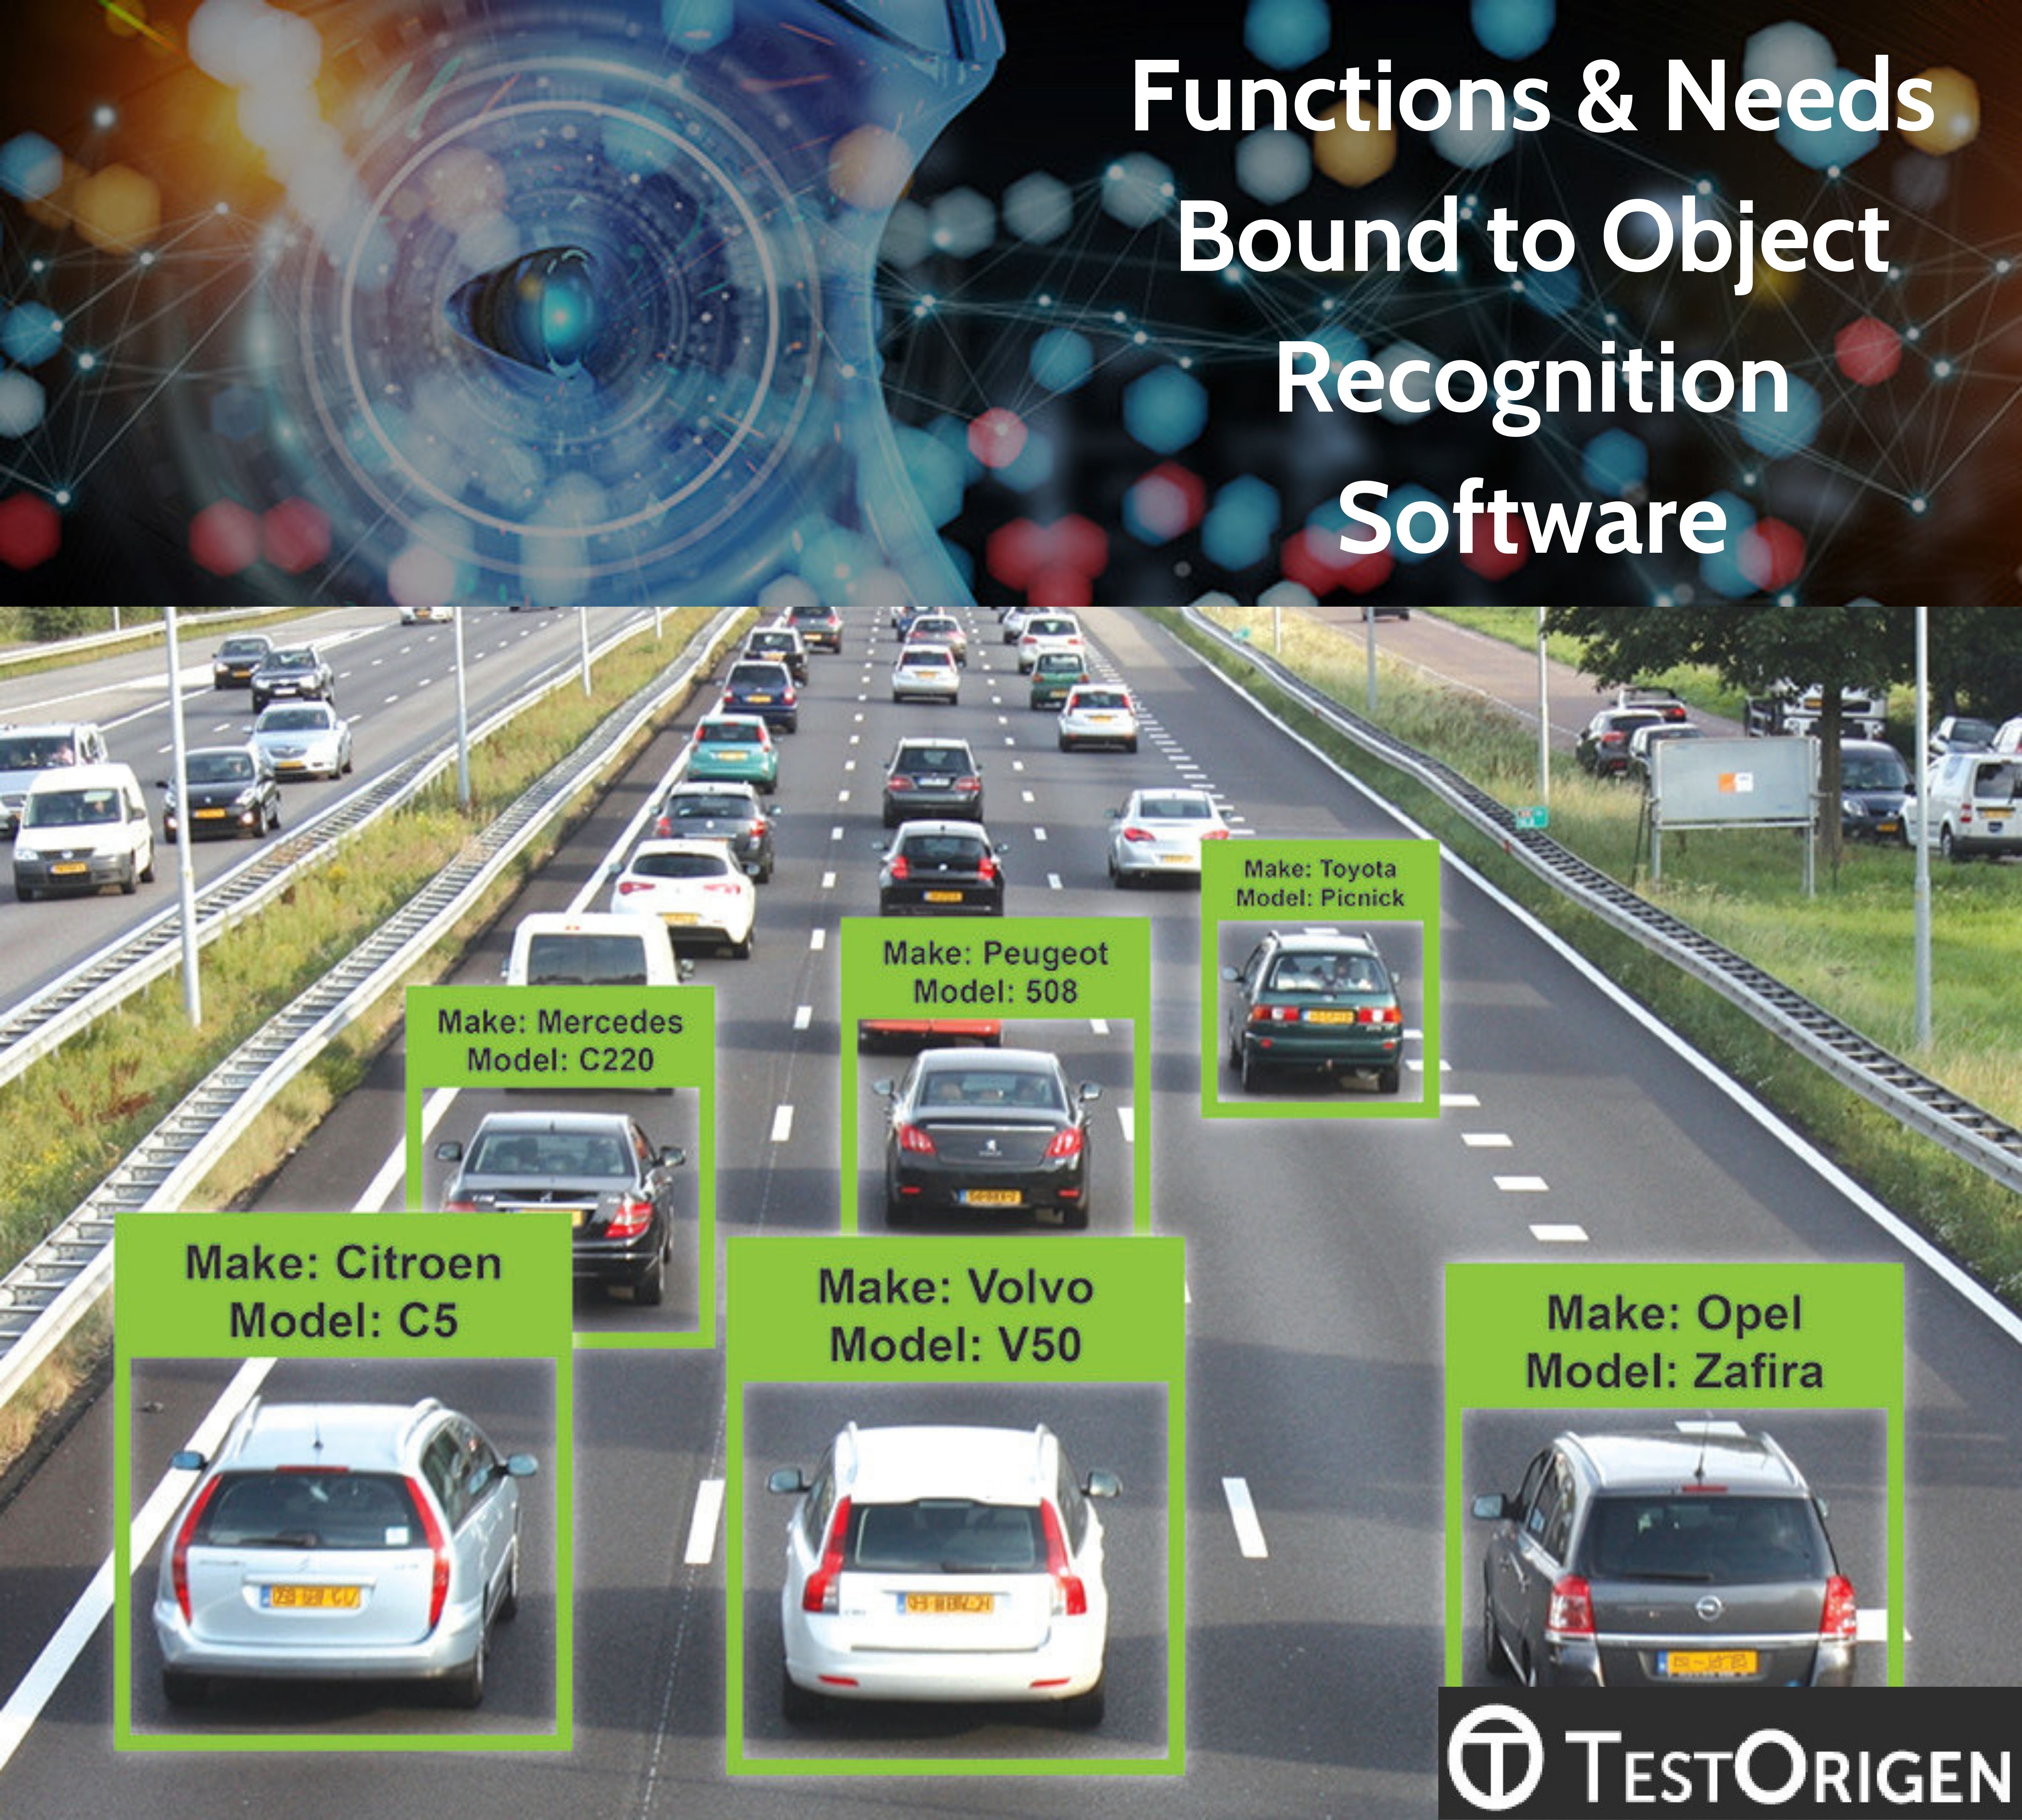 Functions & Needs Bound to Object Recognition Software